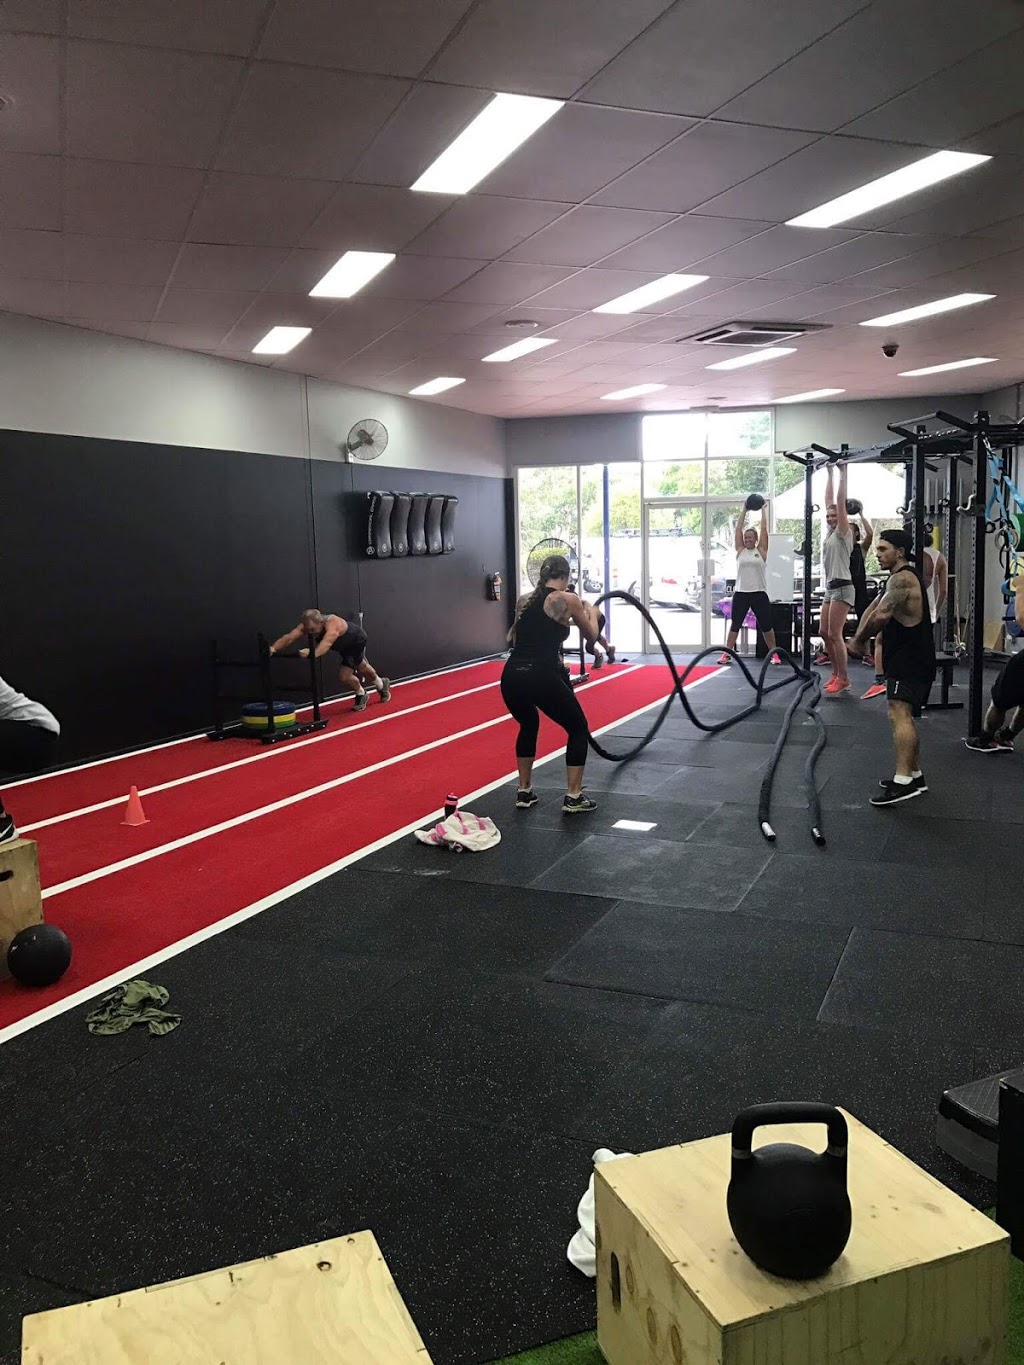 Pegasus Strength and Conditioning | gym | 33 Rene St, Noosaville QLD 4566, Australia | 0439674386 OR +61 439 674 386